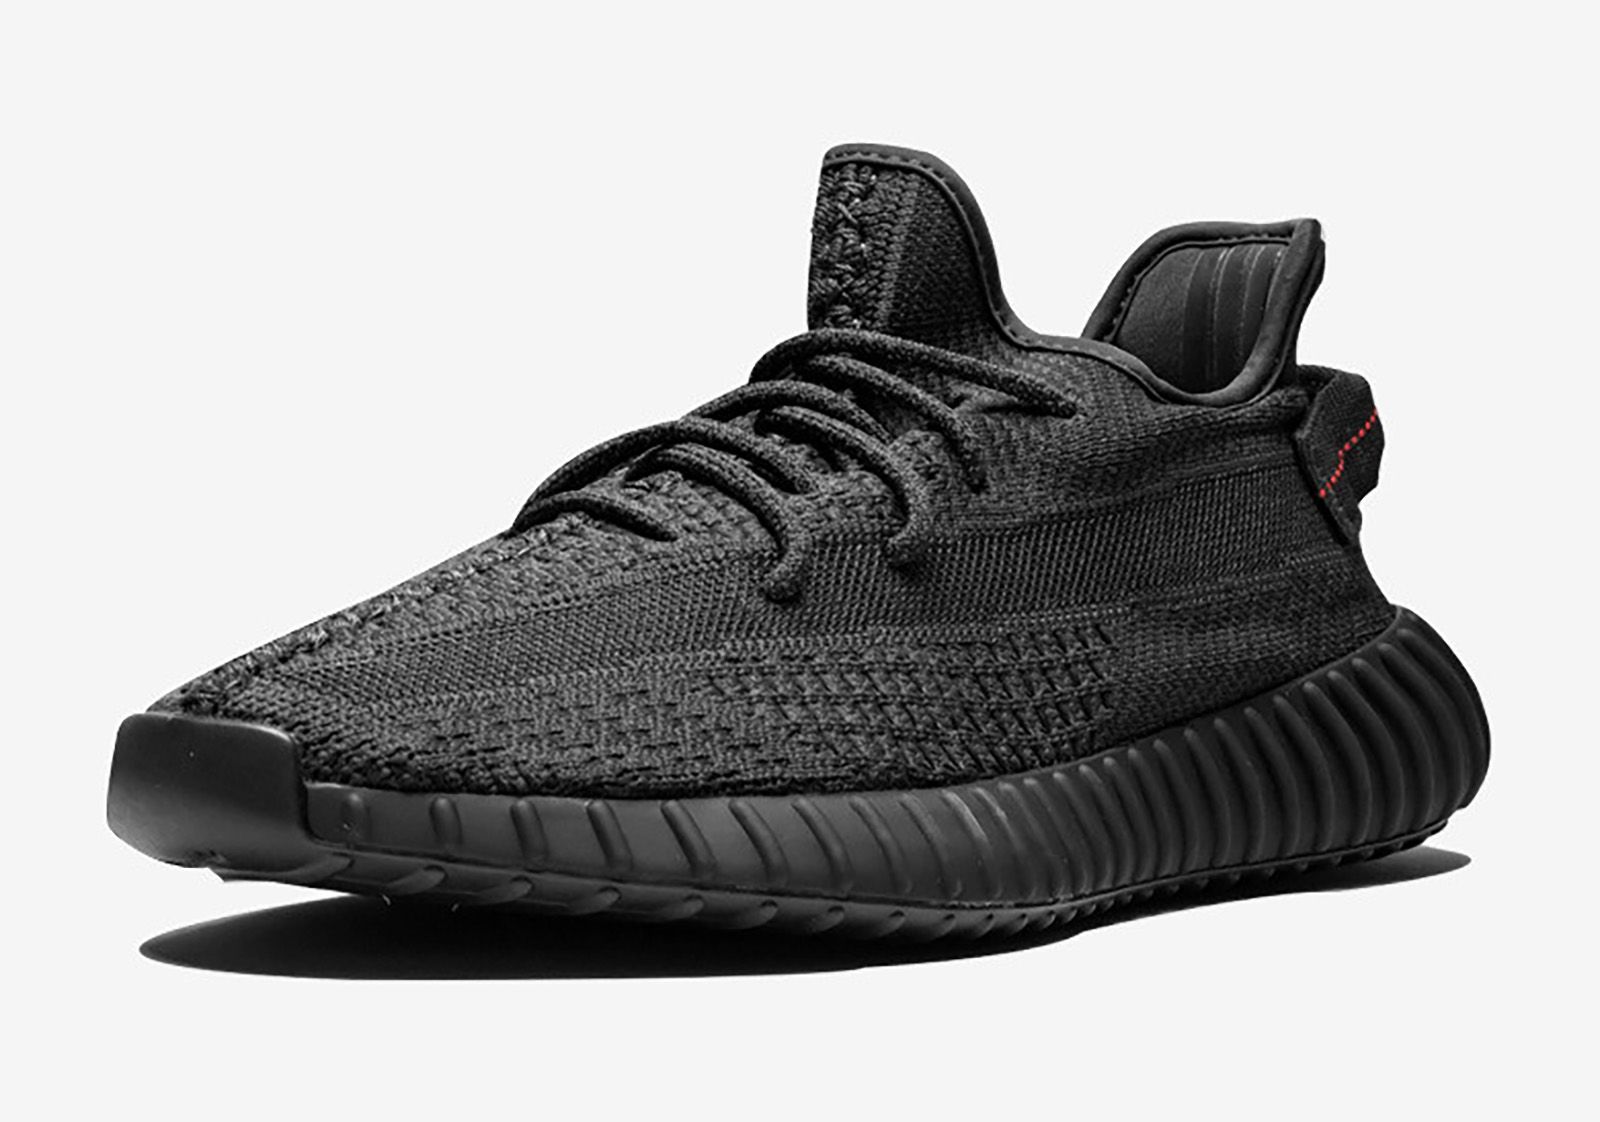 Maak leven Overeenkomend Editor Adidas Yeezy Boost 350 V2: Shoppers line up for new Kanye West sneaker | CNN